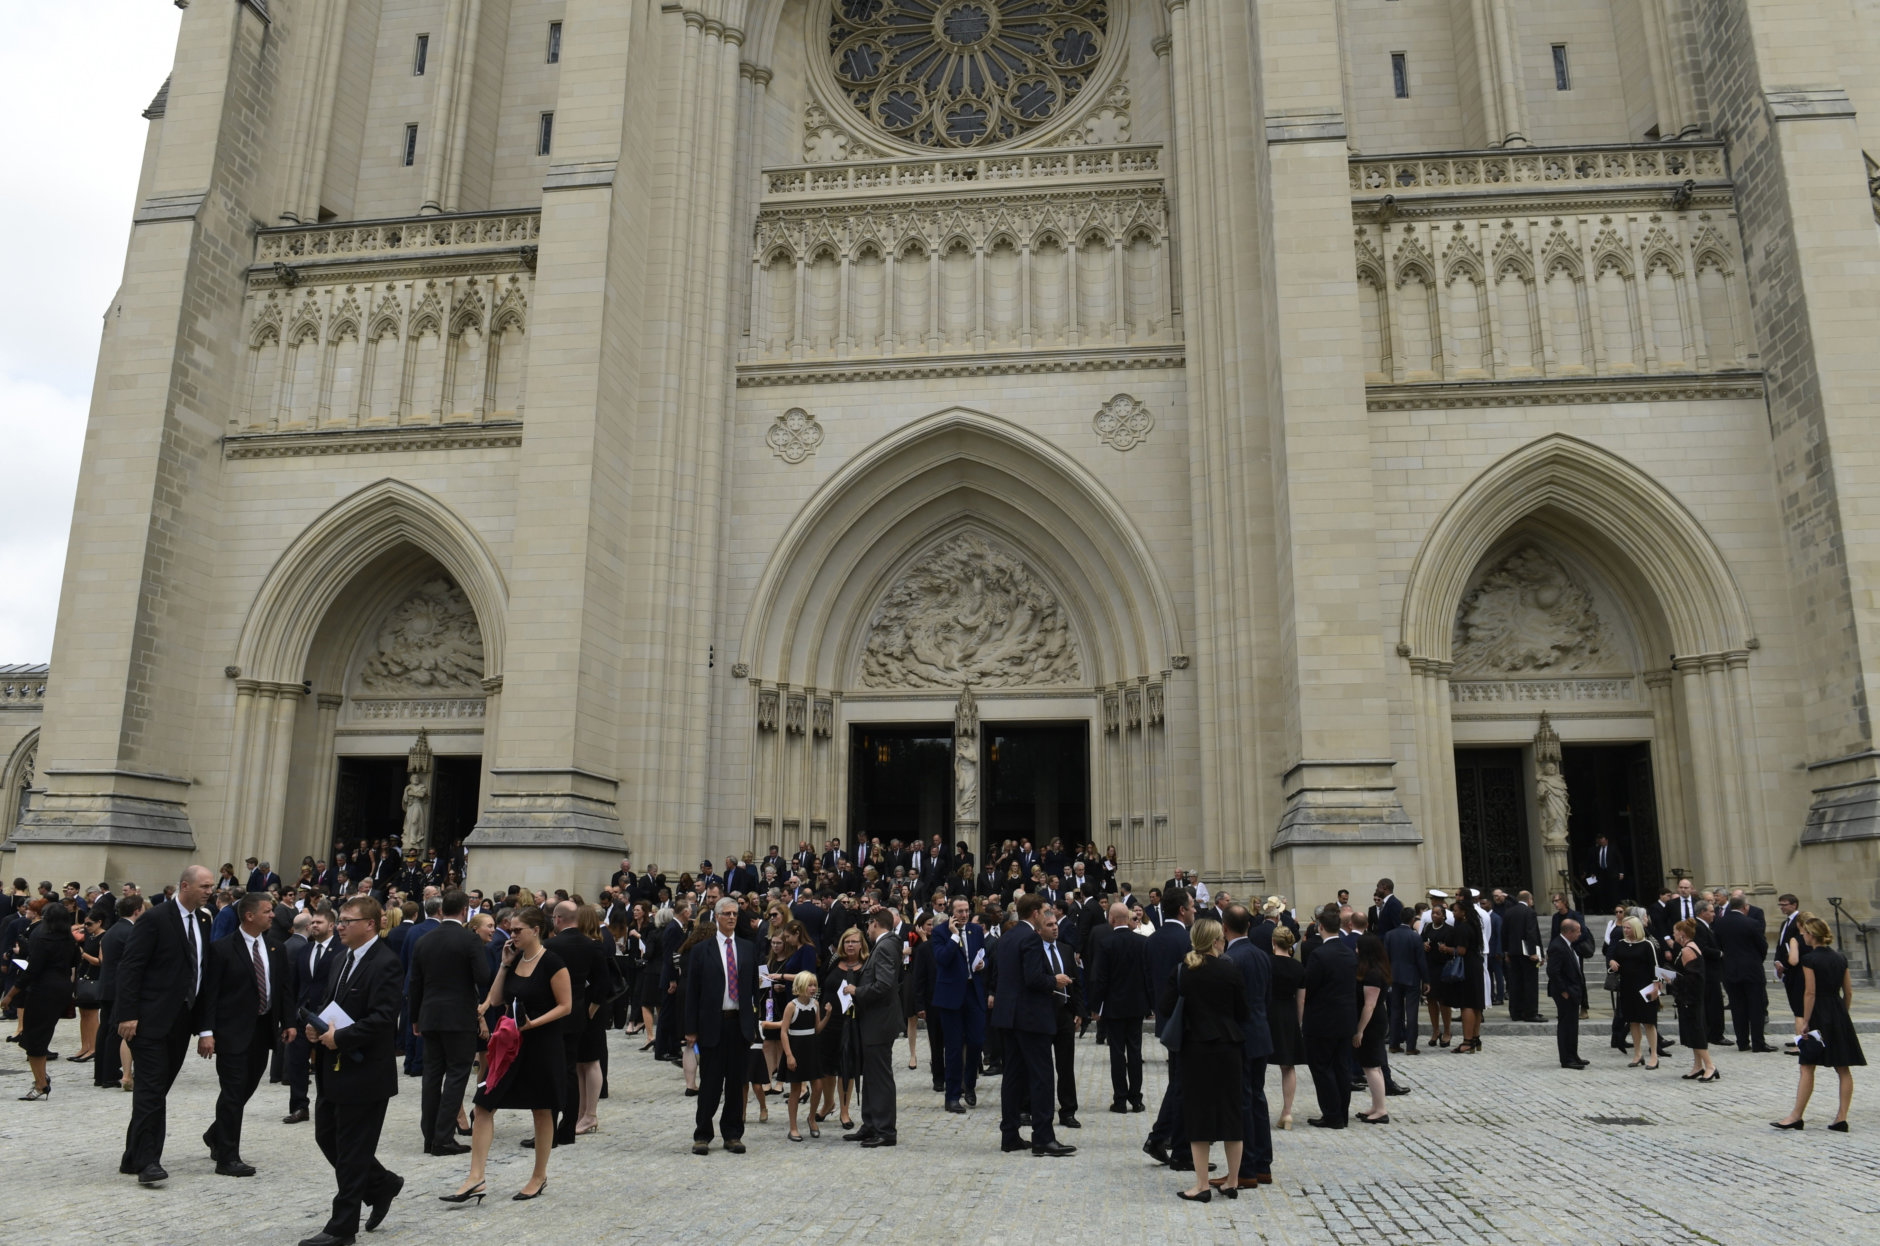 People leave the Washington National Cathedral in Washington, Saturday, Sept. 1, 2018, following a memorial service for Sen. John McCain, R-Ariz. McCain died Aug. 25 from brain cancer at age 81. (AP Photo/Susan Walsh)